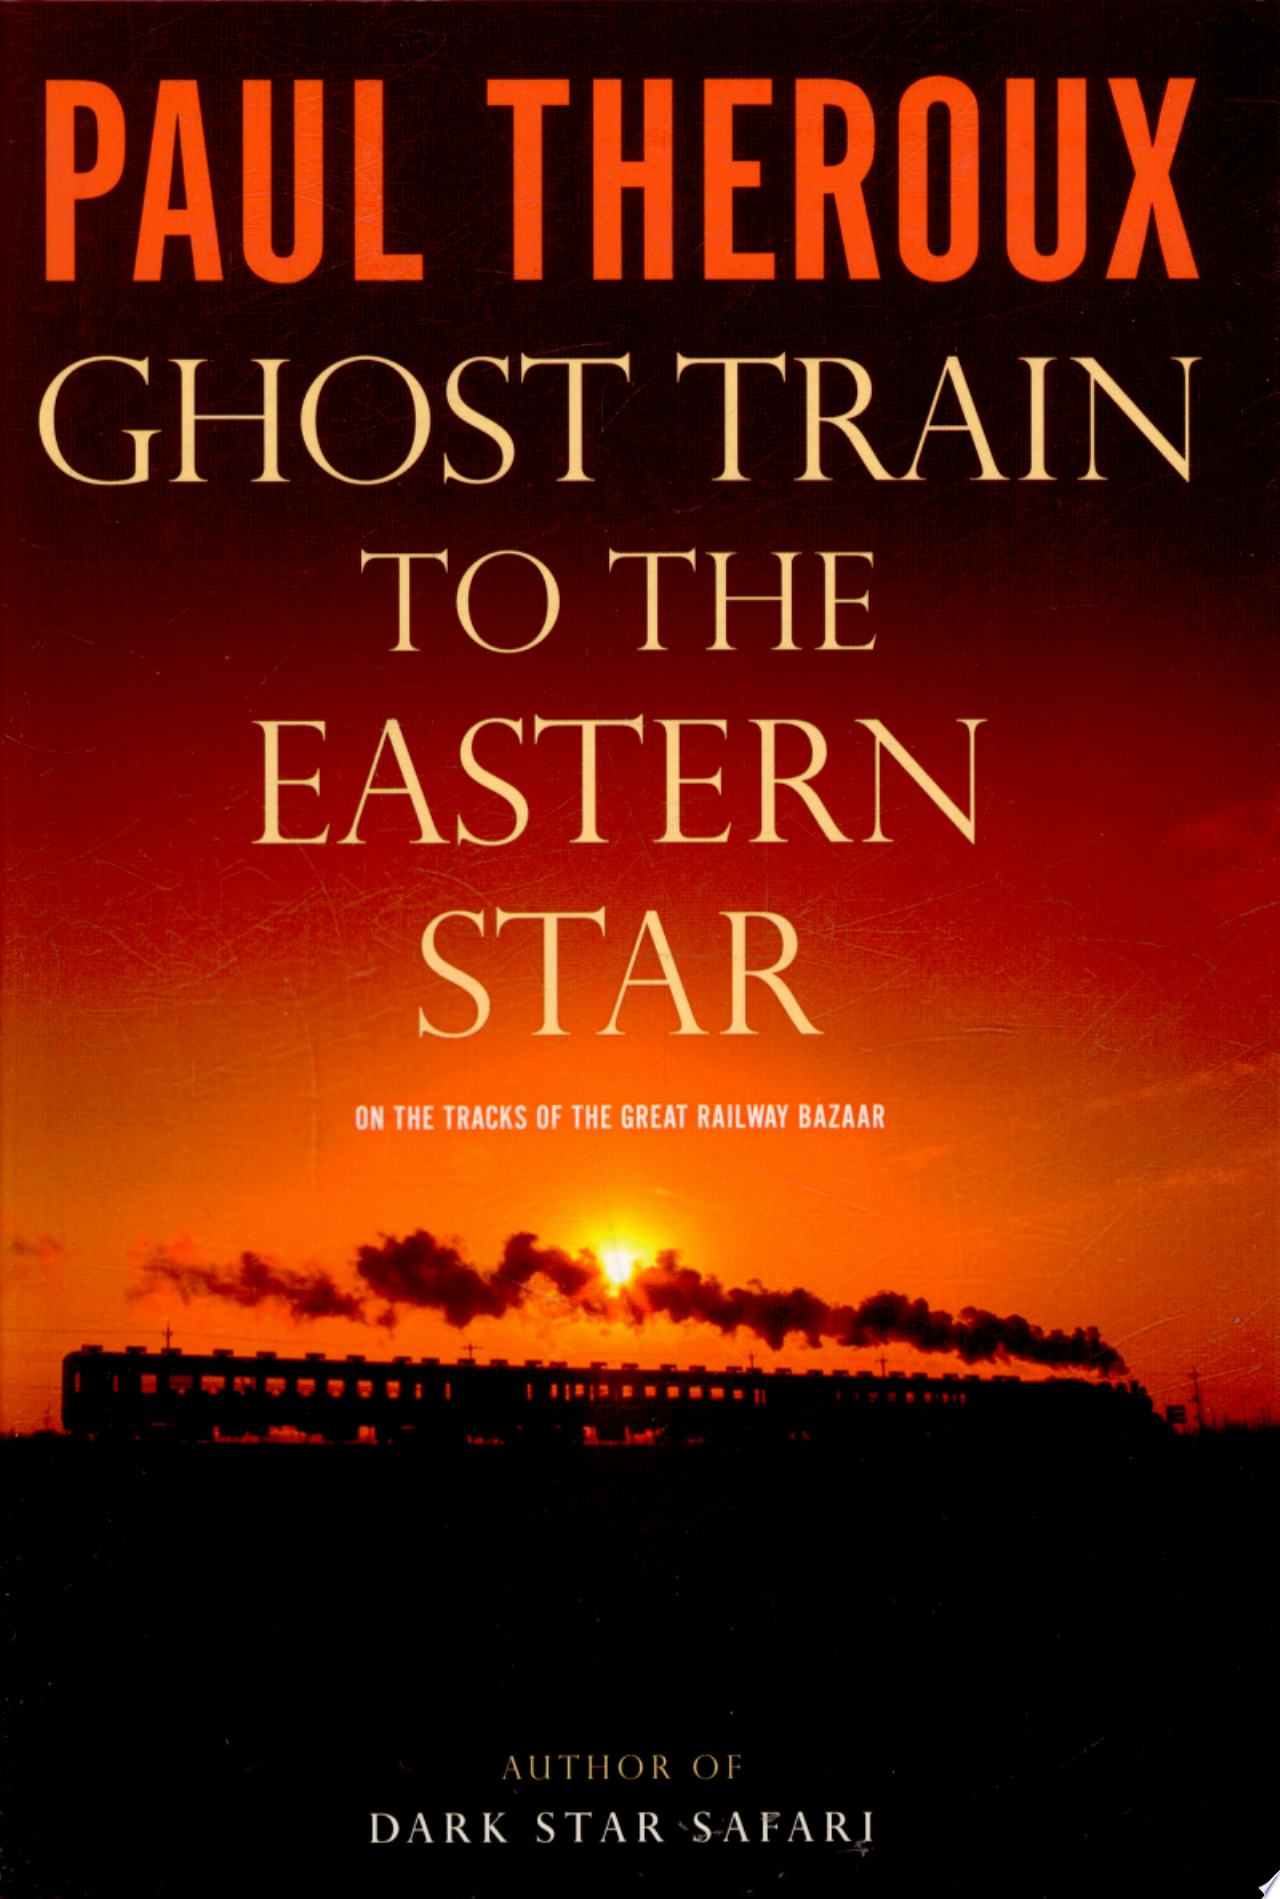 Image for "Ghost Train to the Eastern Star"